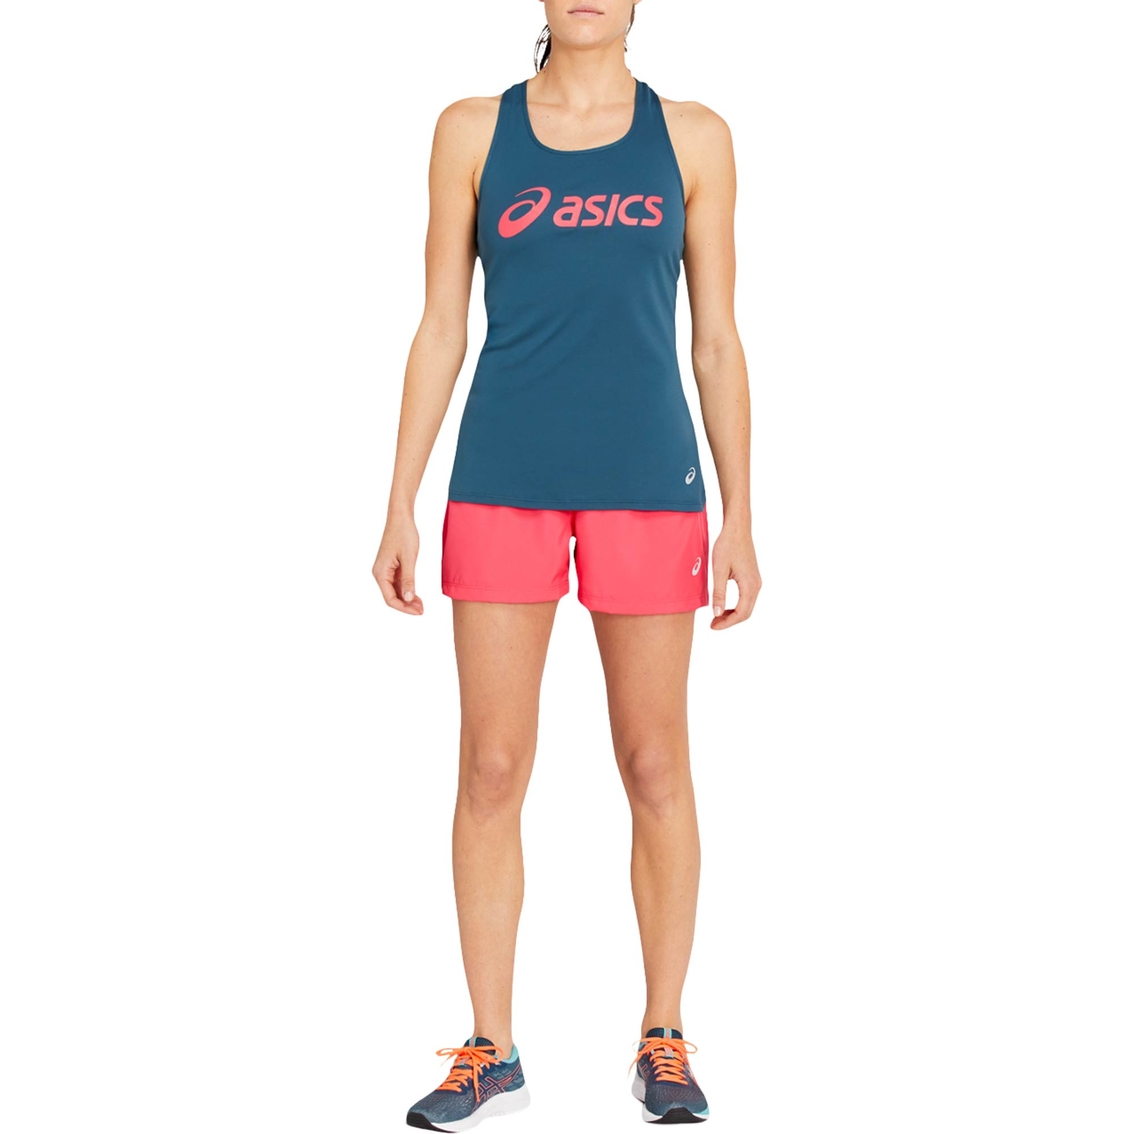 ASICS Silver 4 in. Shorts - Image 5 of 5